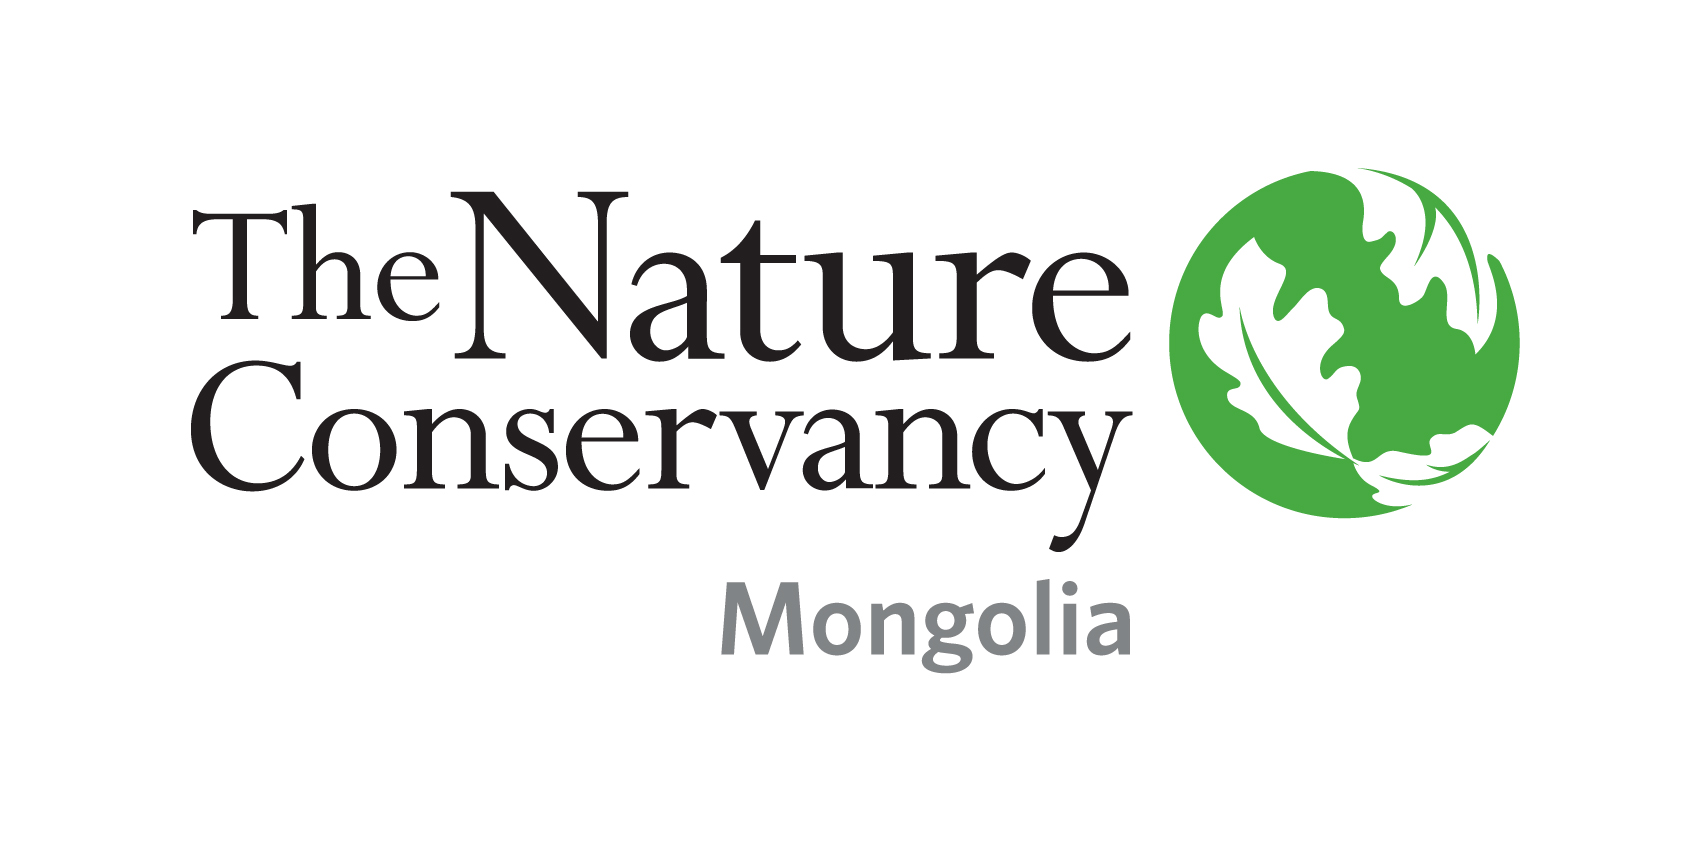 The Nature Conservancy Mongolia